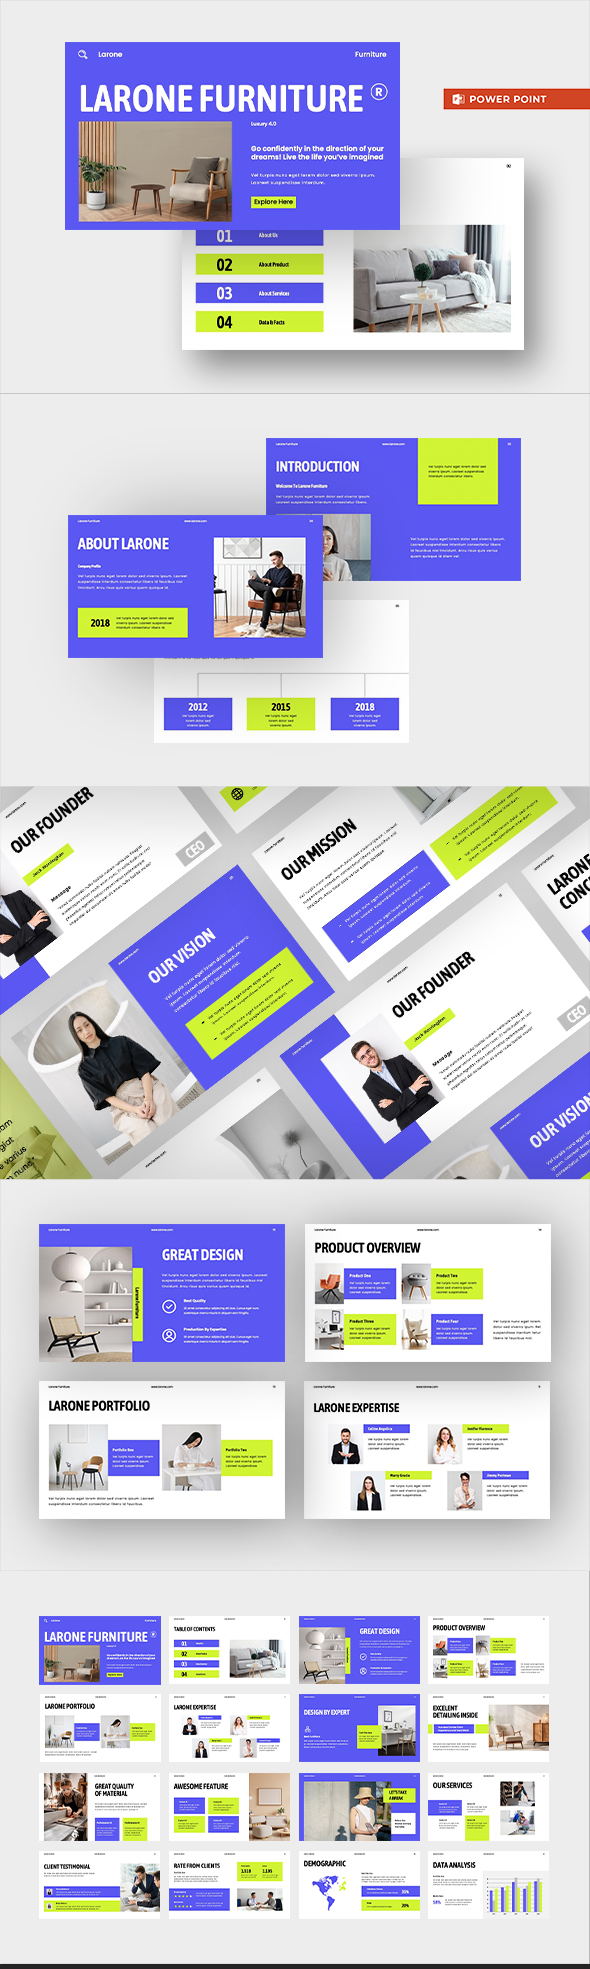 [DOWNLOAD]Purple Lime Creative Furniture Business Template 001